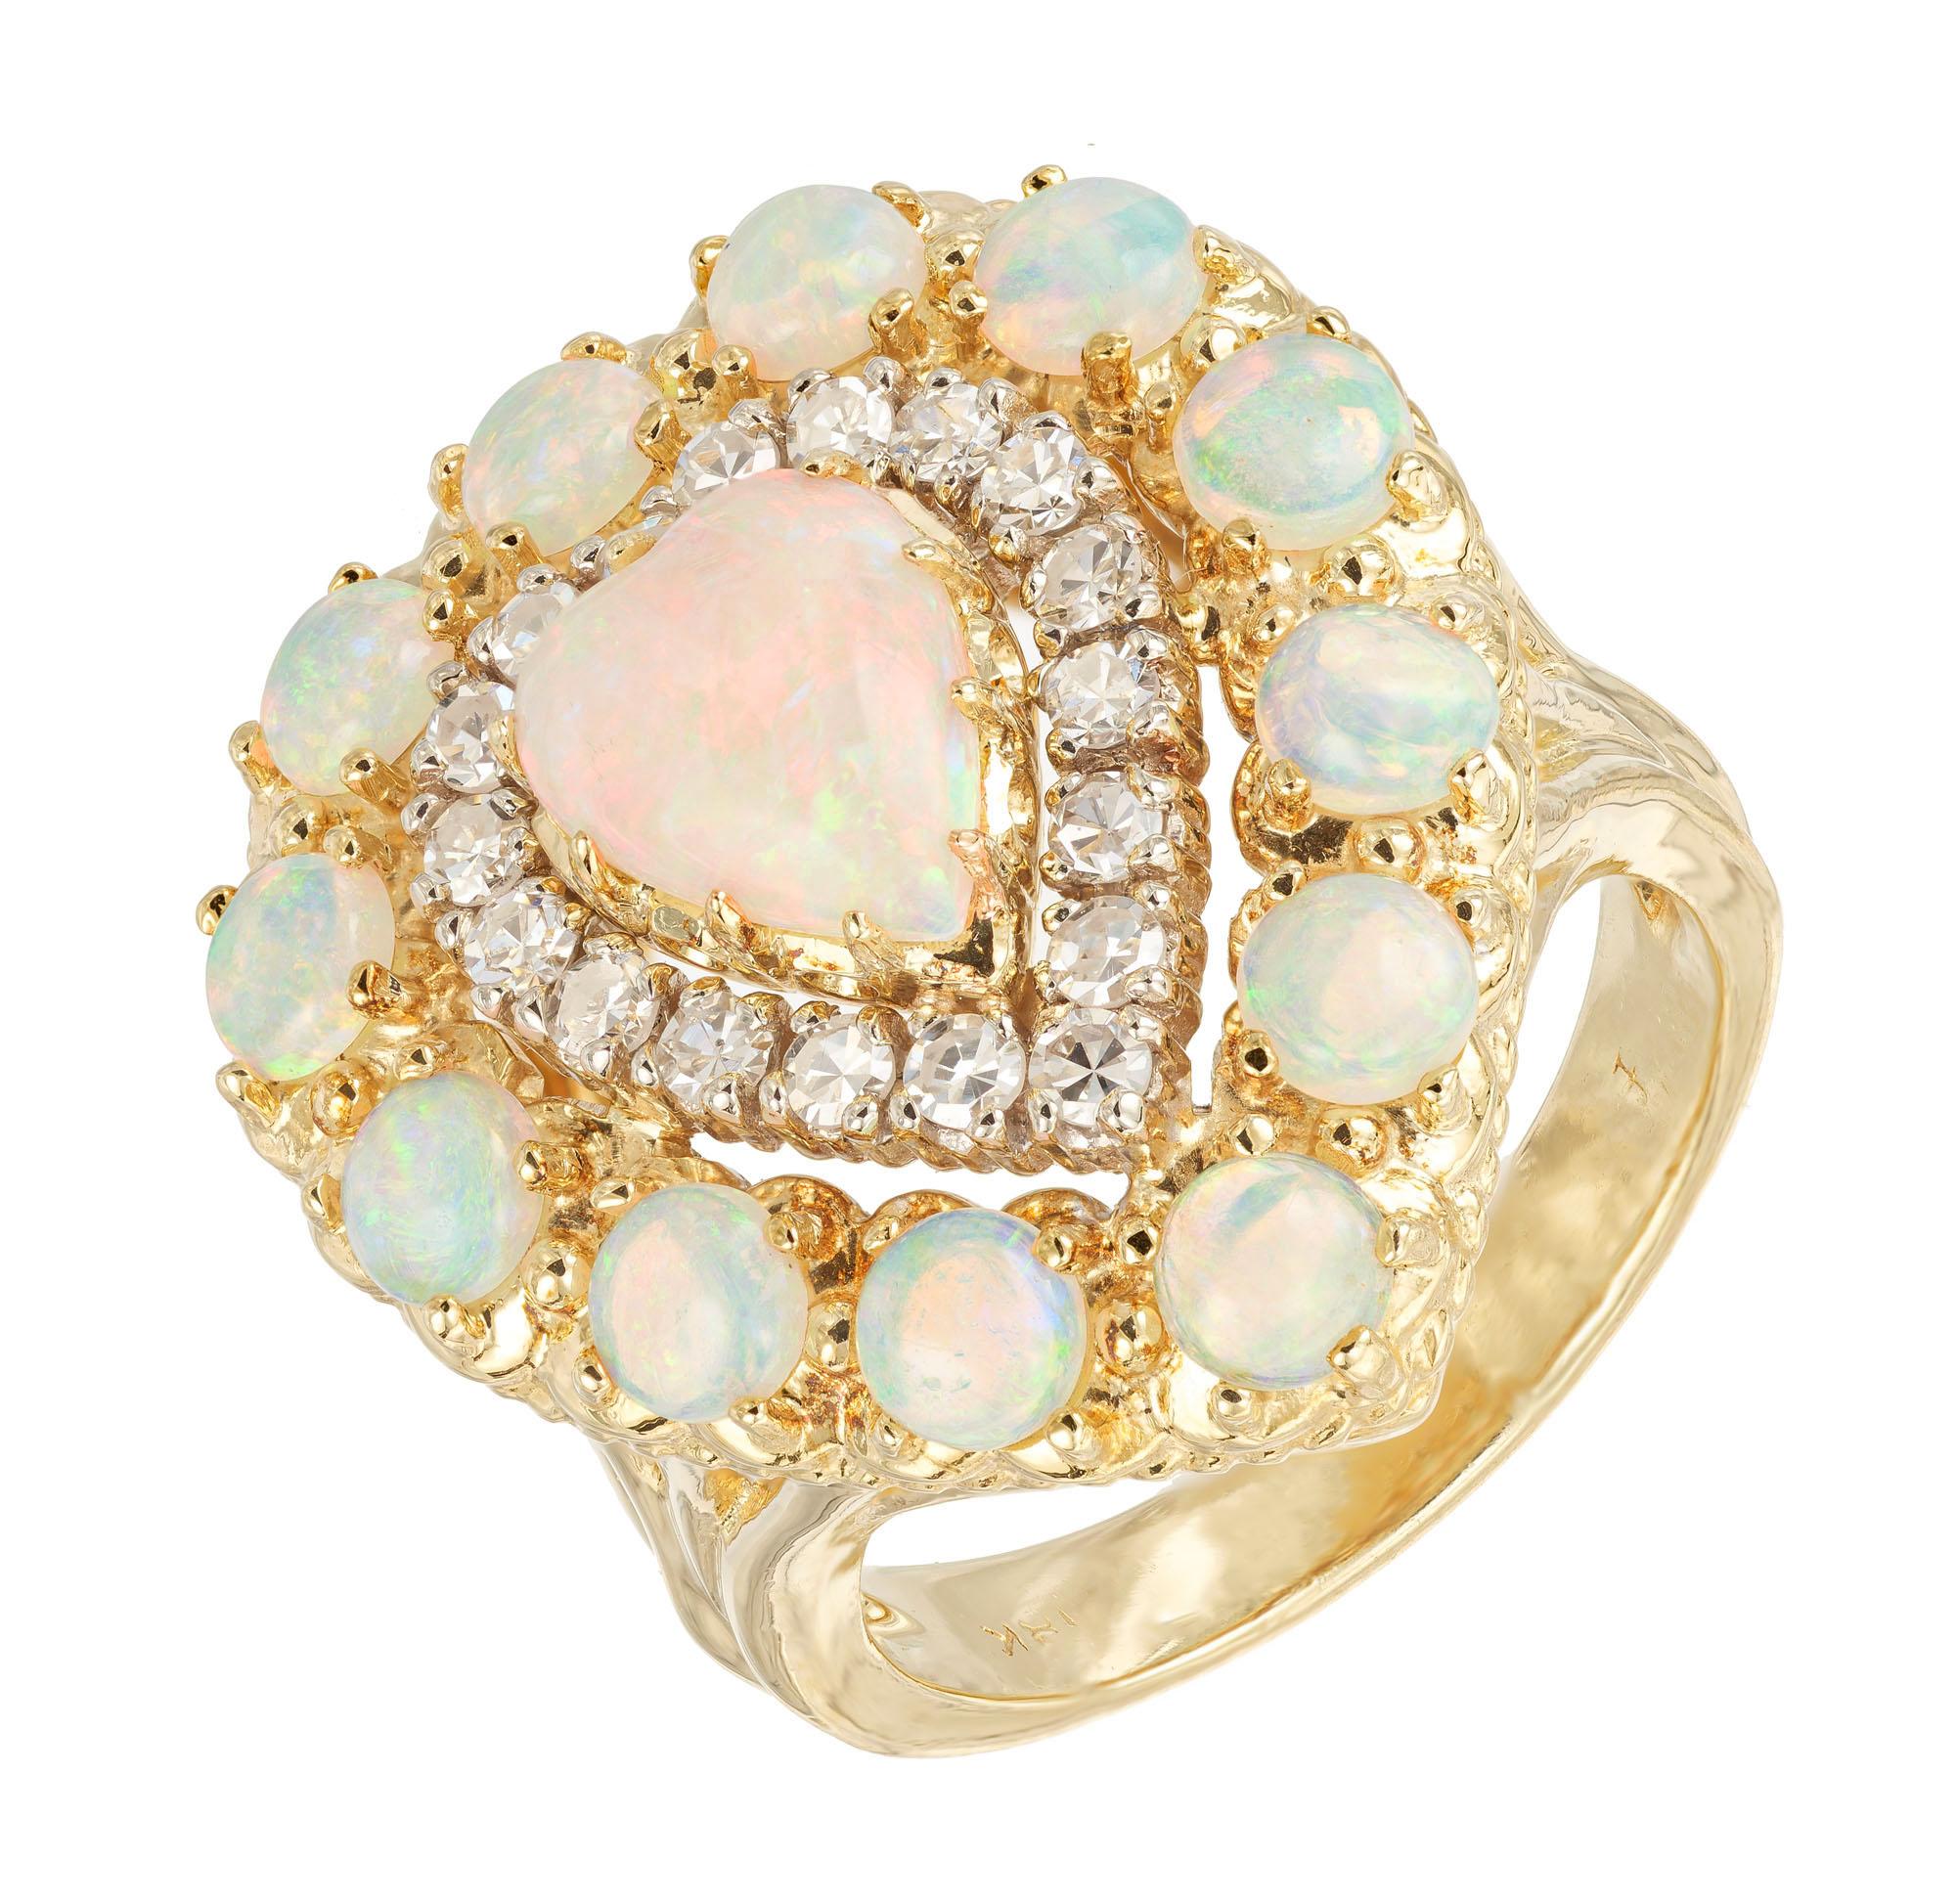 1950's Opal and diamond cluster cocktail ring. Heart shaped center opal with a halo of single cut round diamonds with a second halo of round cut opals, set in a 18k yellow gold setting. 

1 heart shaped opal .80cts
12 round opals 1.20cts
18 single